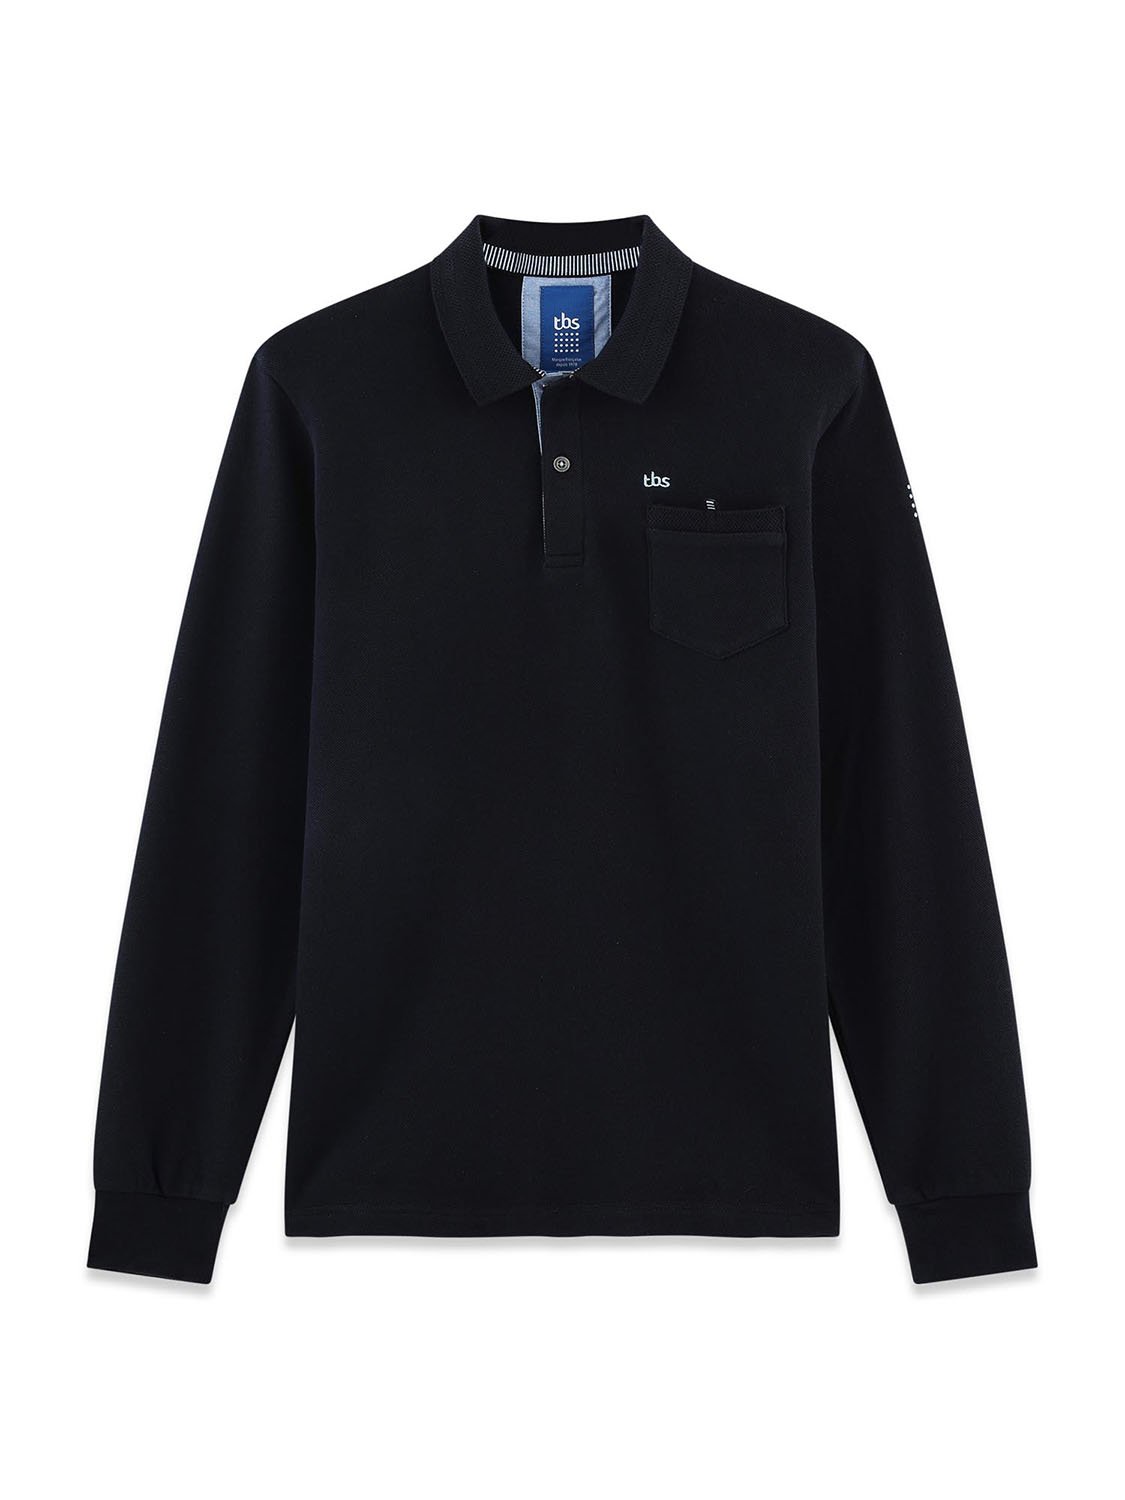 Polo Homme Manches Longues Coton Marine